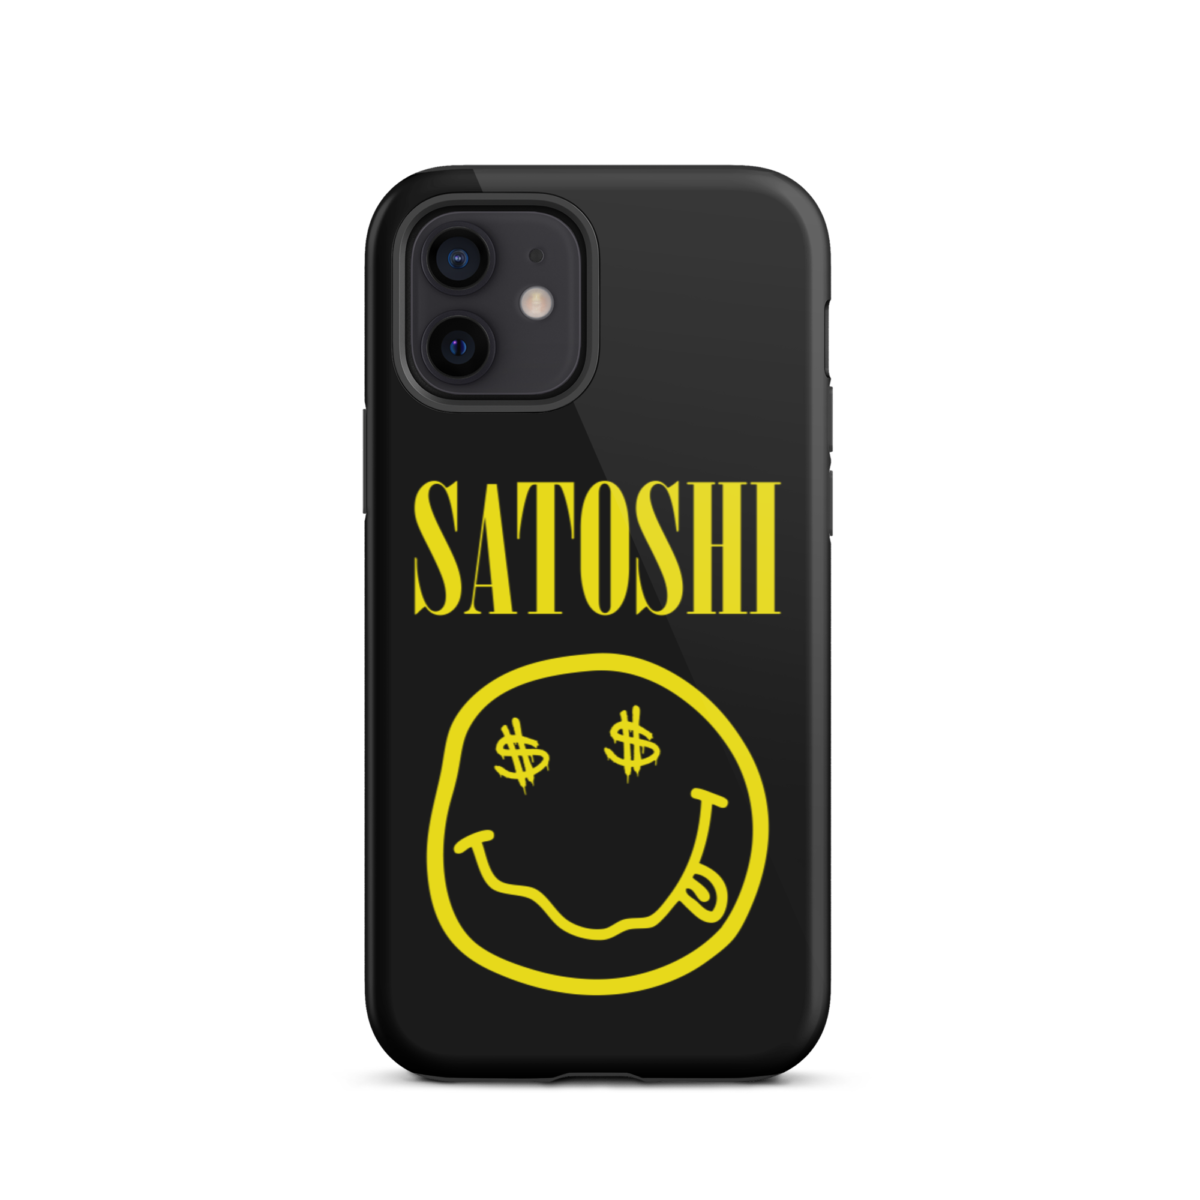 tough iphone case glossy iphone 12 front 6397c1799e813 - Satoshi YLW Tough iPhone Case